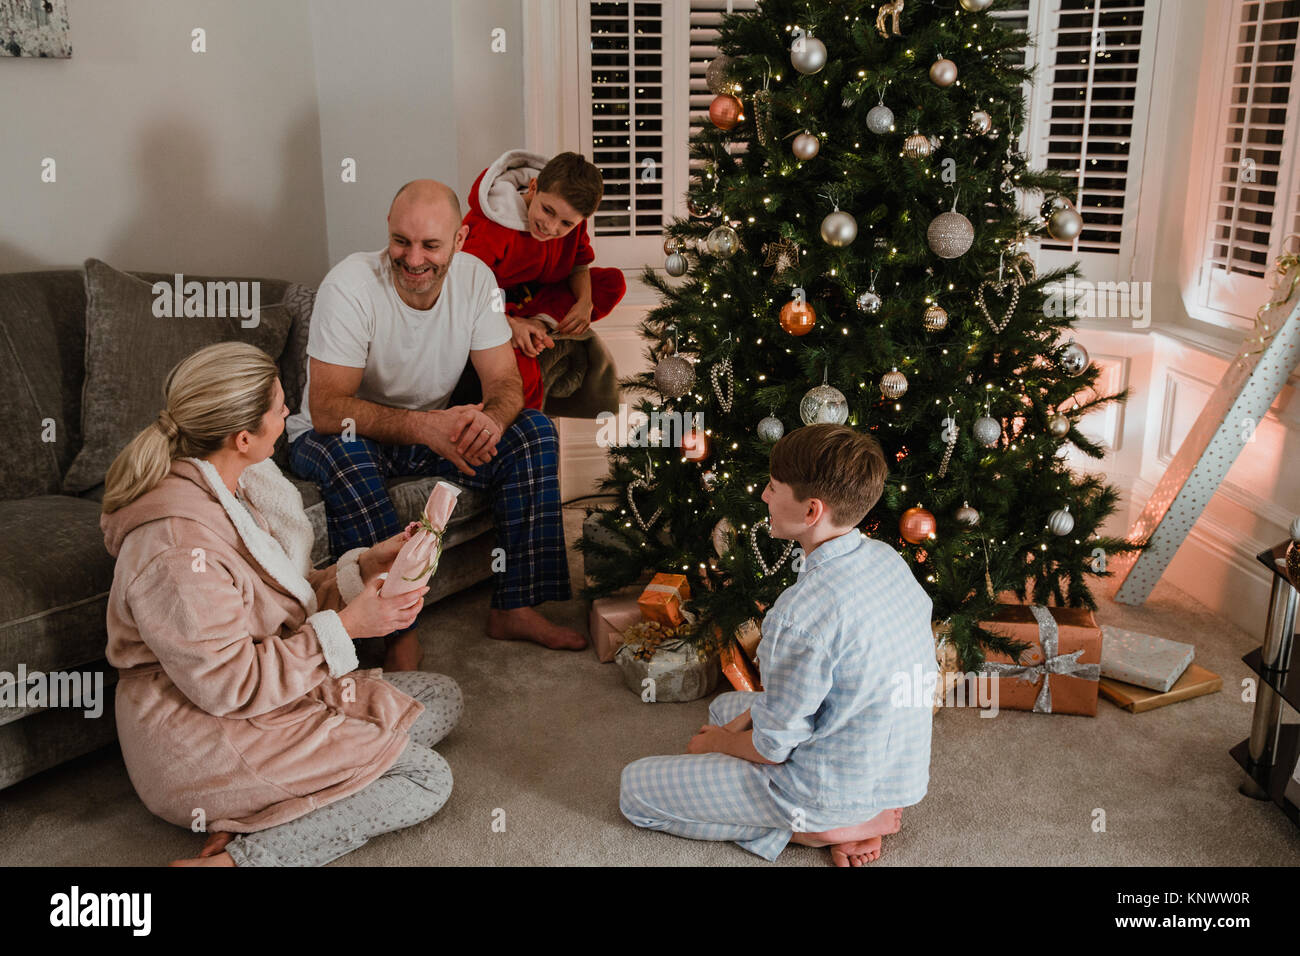 Happy family are opening presents together on christmas morning. They are sitting by the christmas tree in the living room of their home, wearing pyja Stock Photo